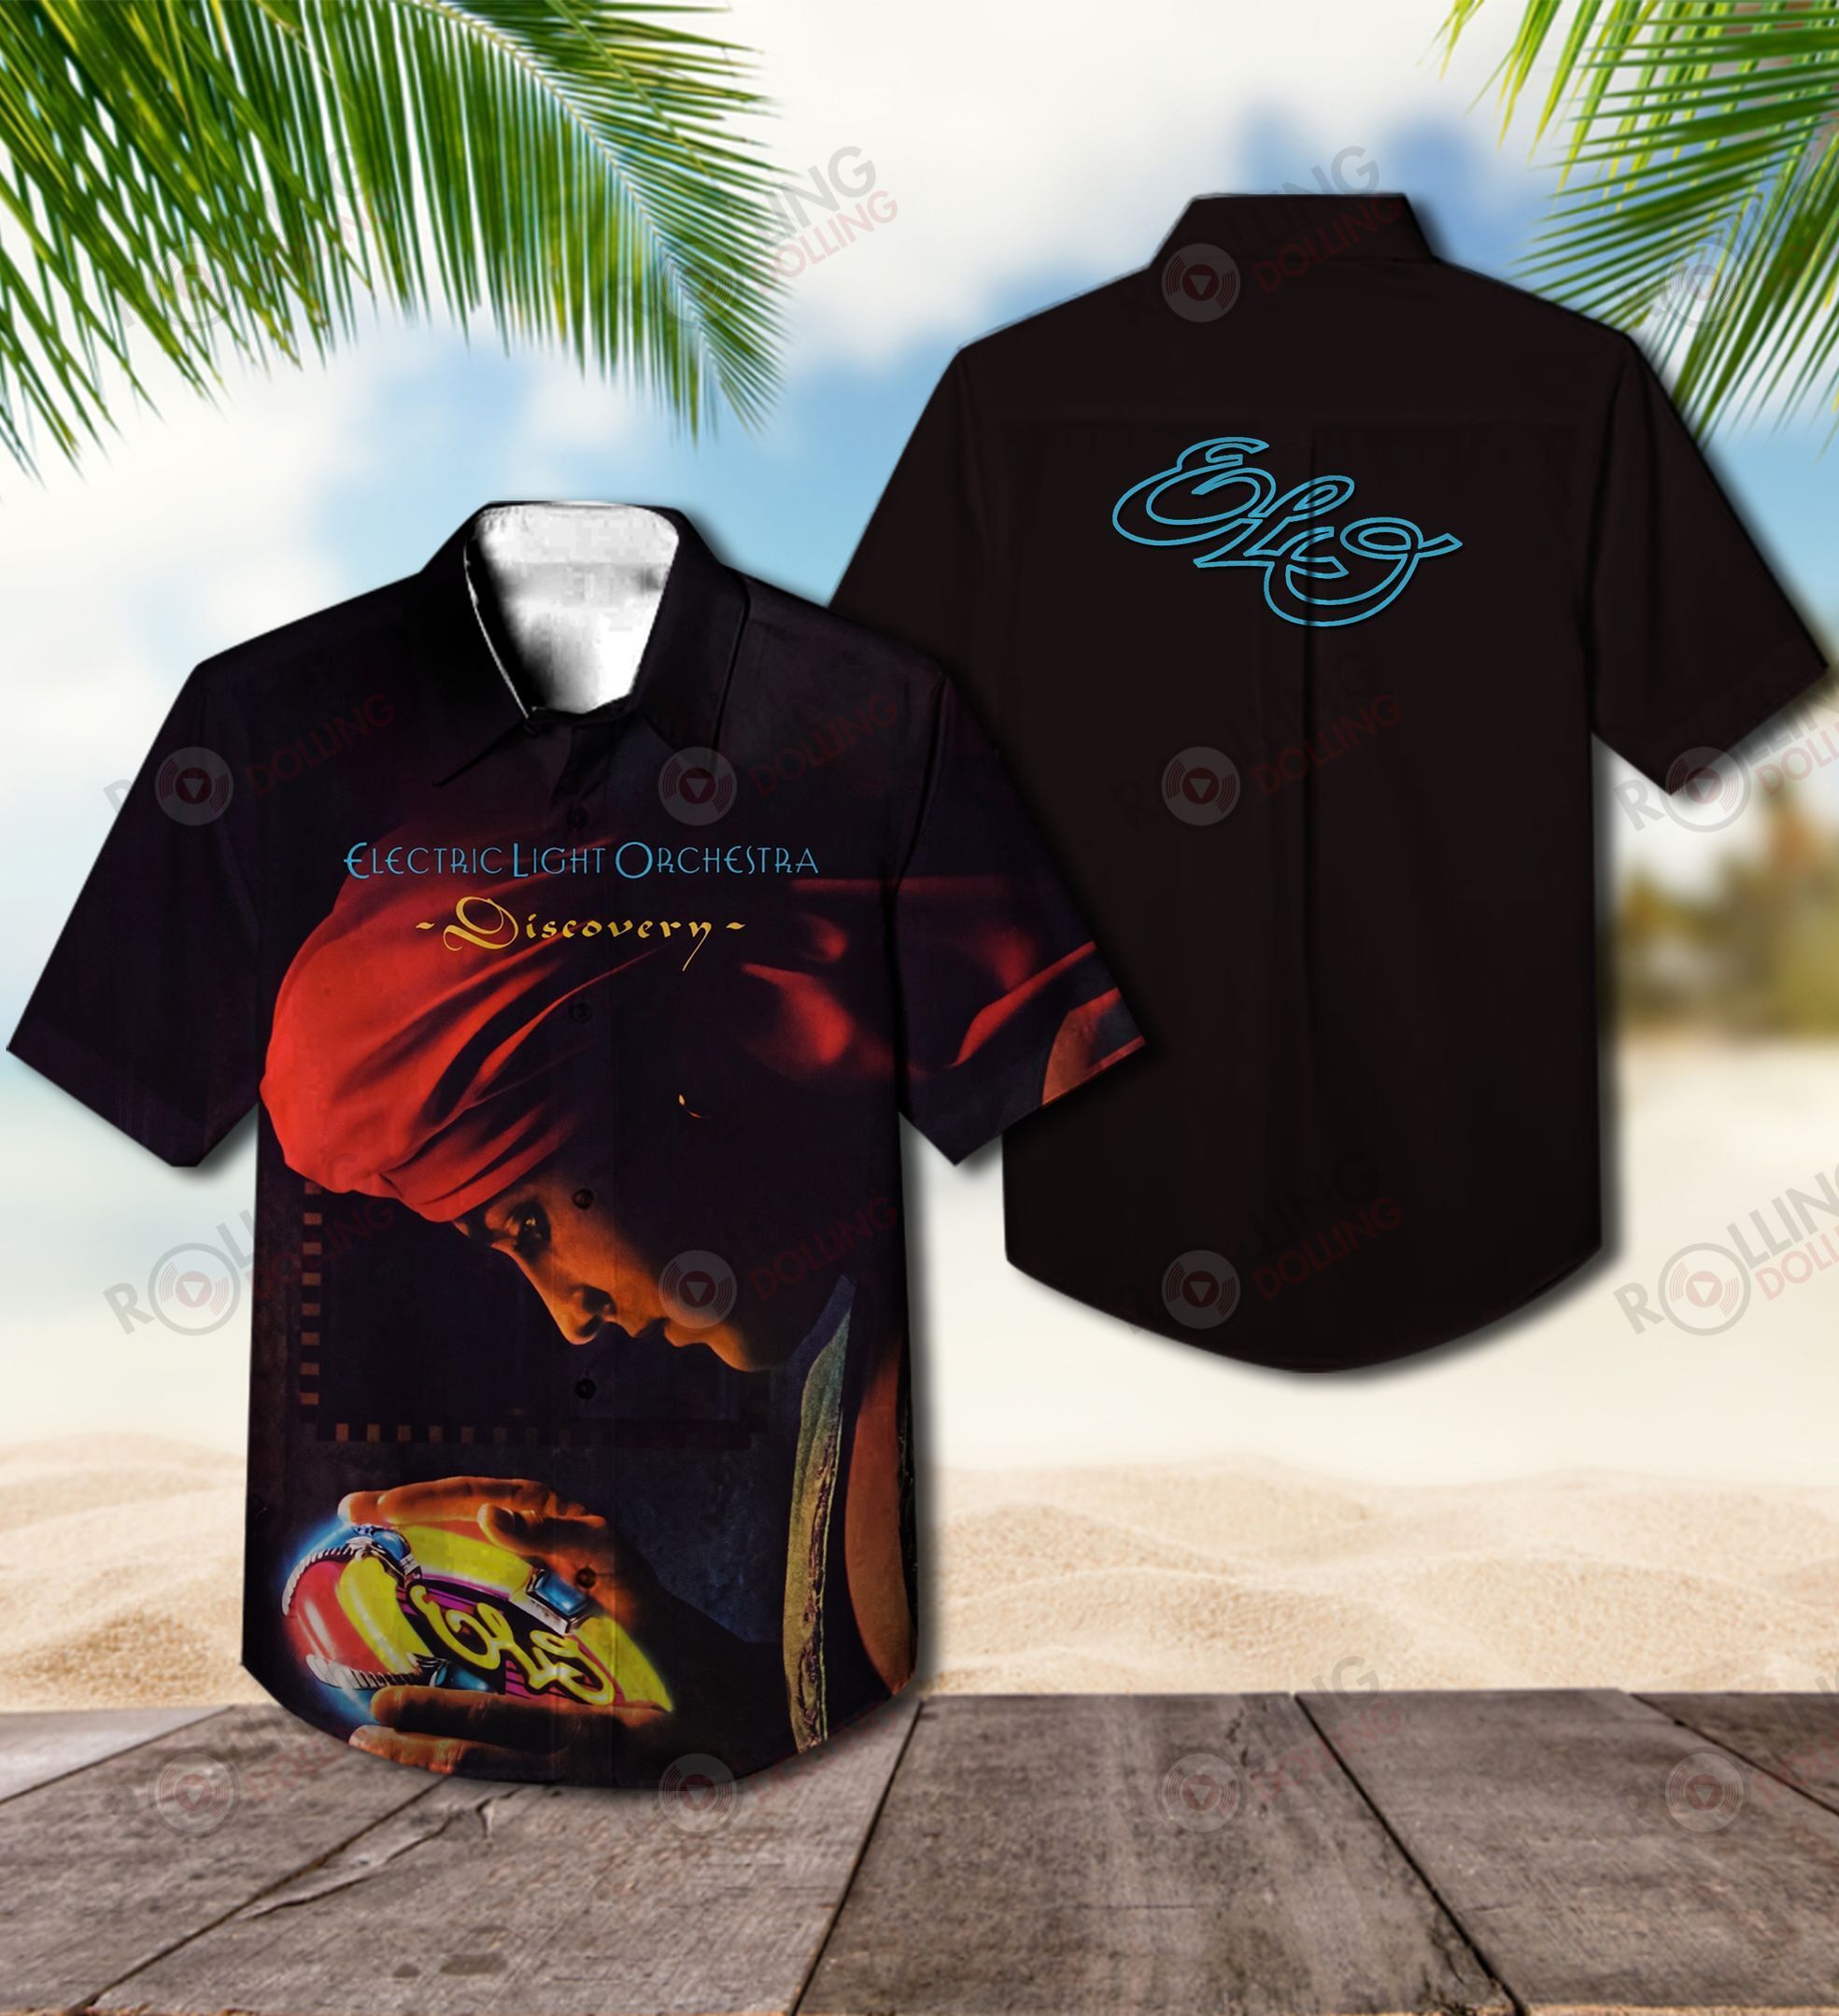 For summer, consider wearing This Amazing Hawaiian Shirt shirt in our store 106